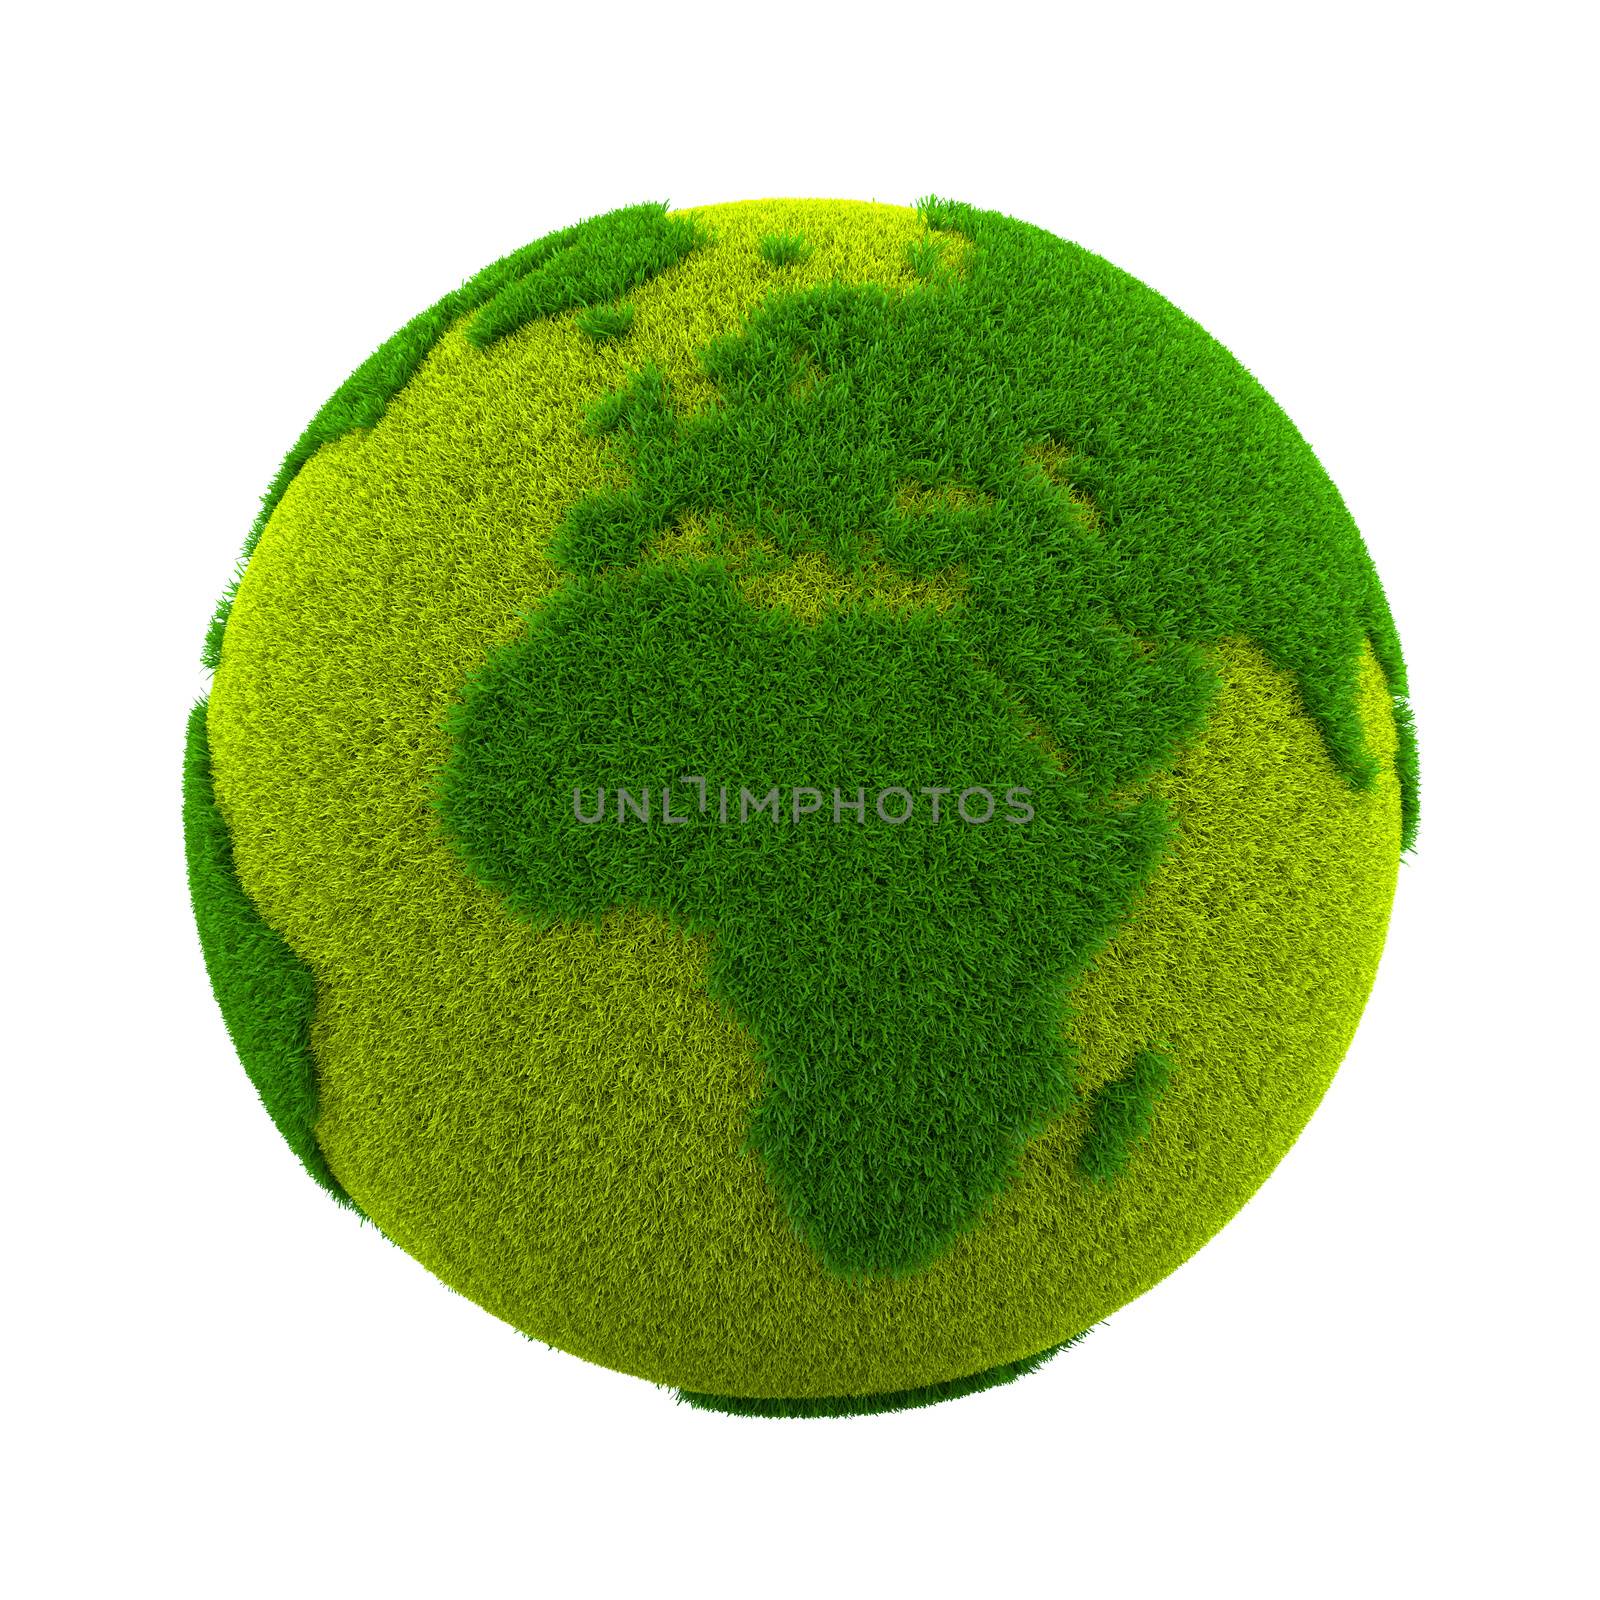 Grass World Planet, Europe and Africa by make